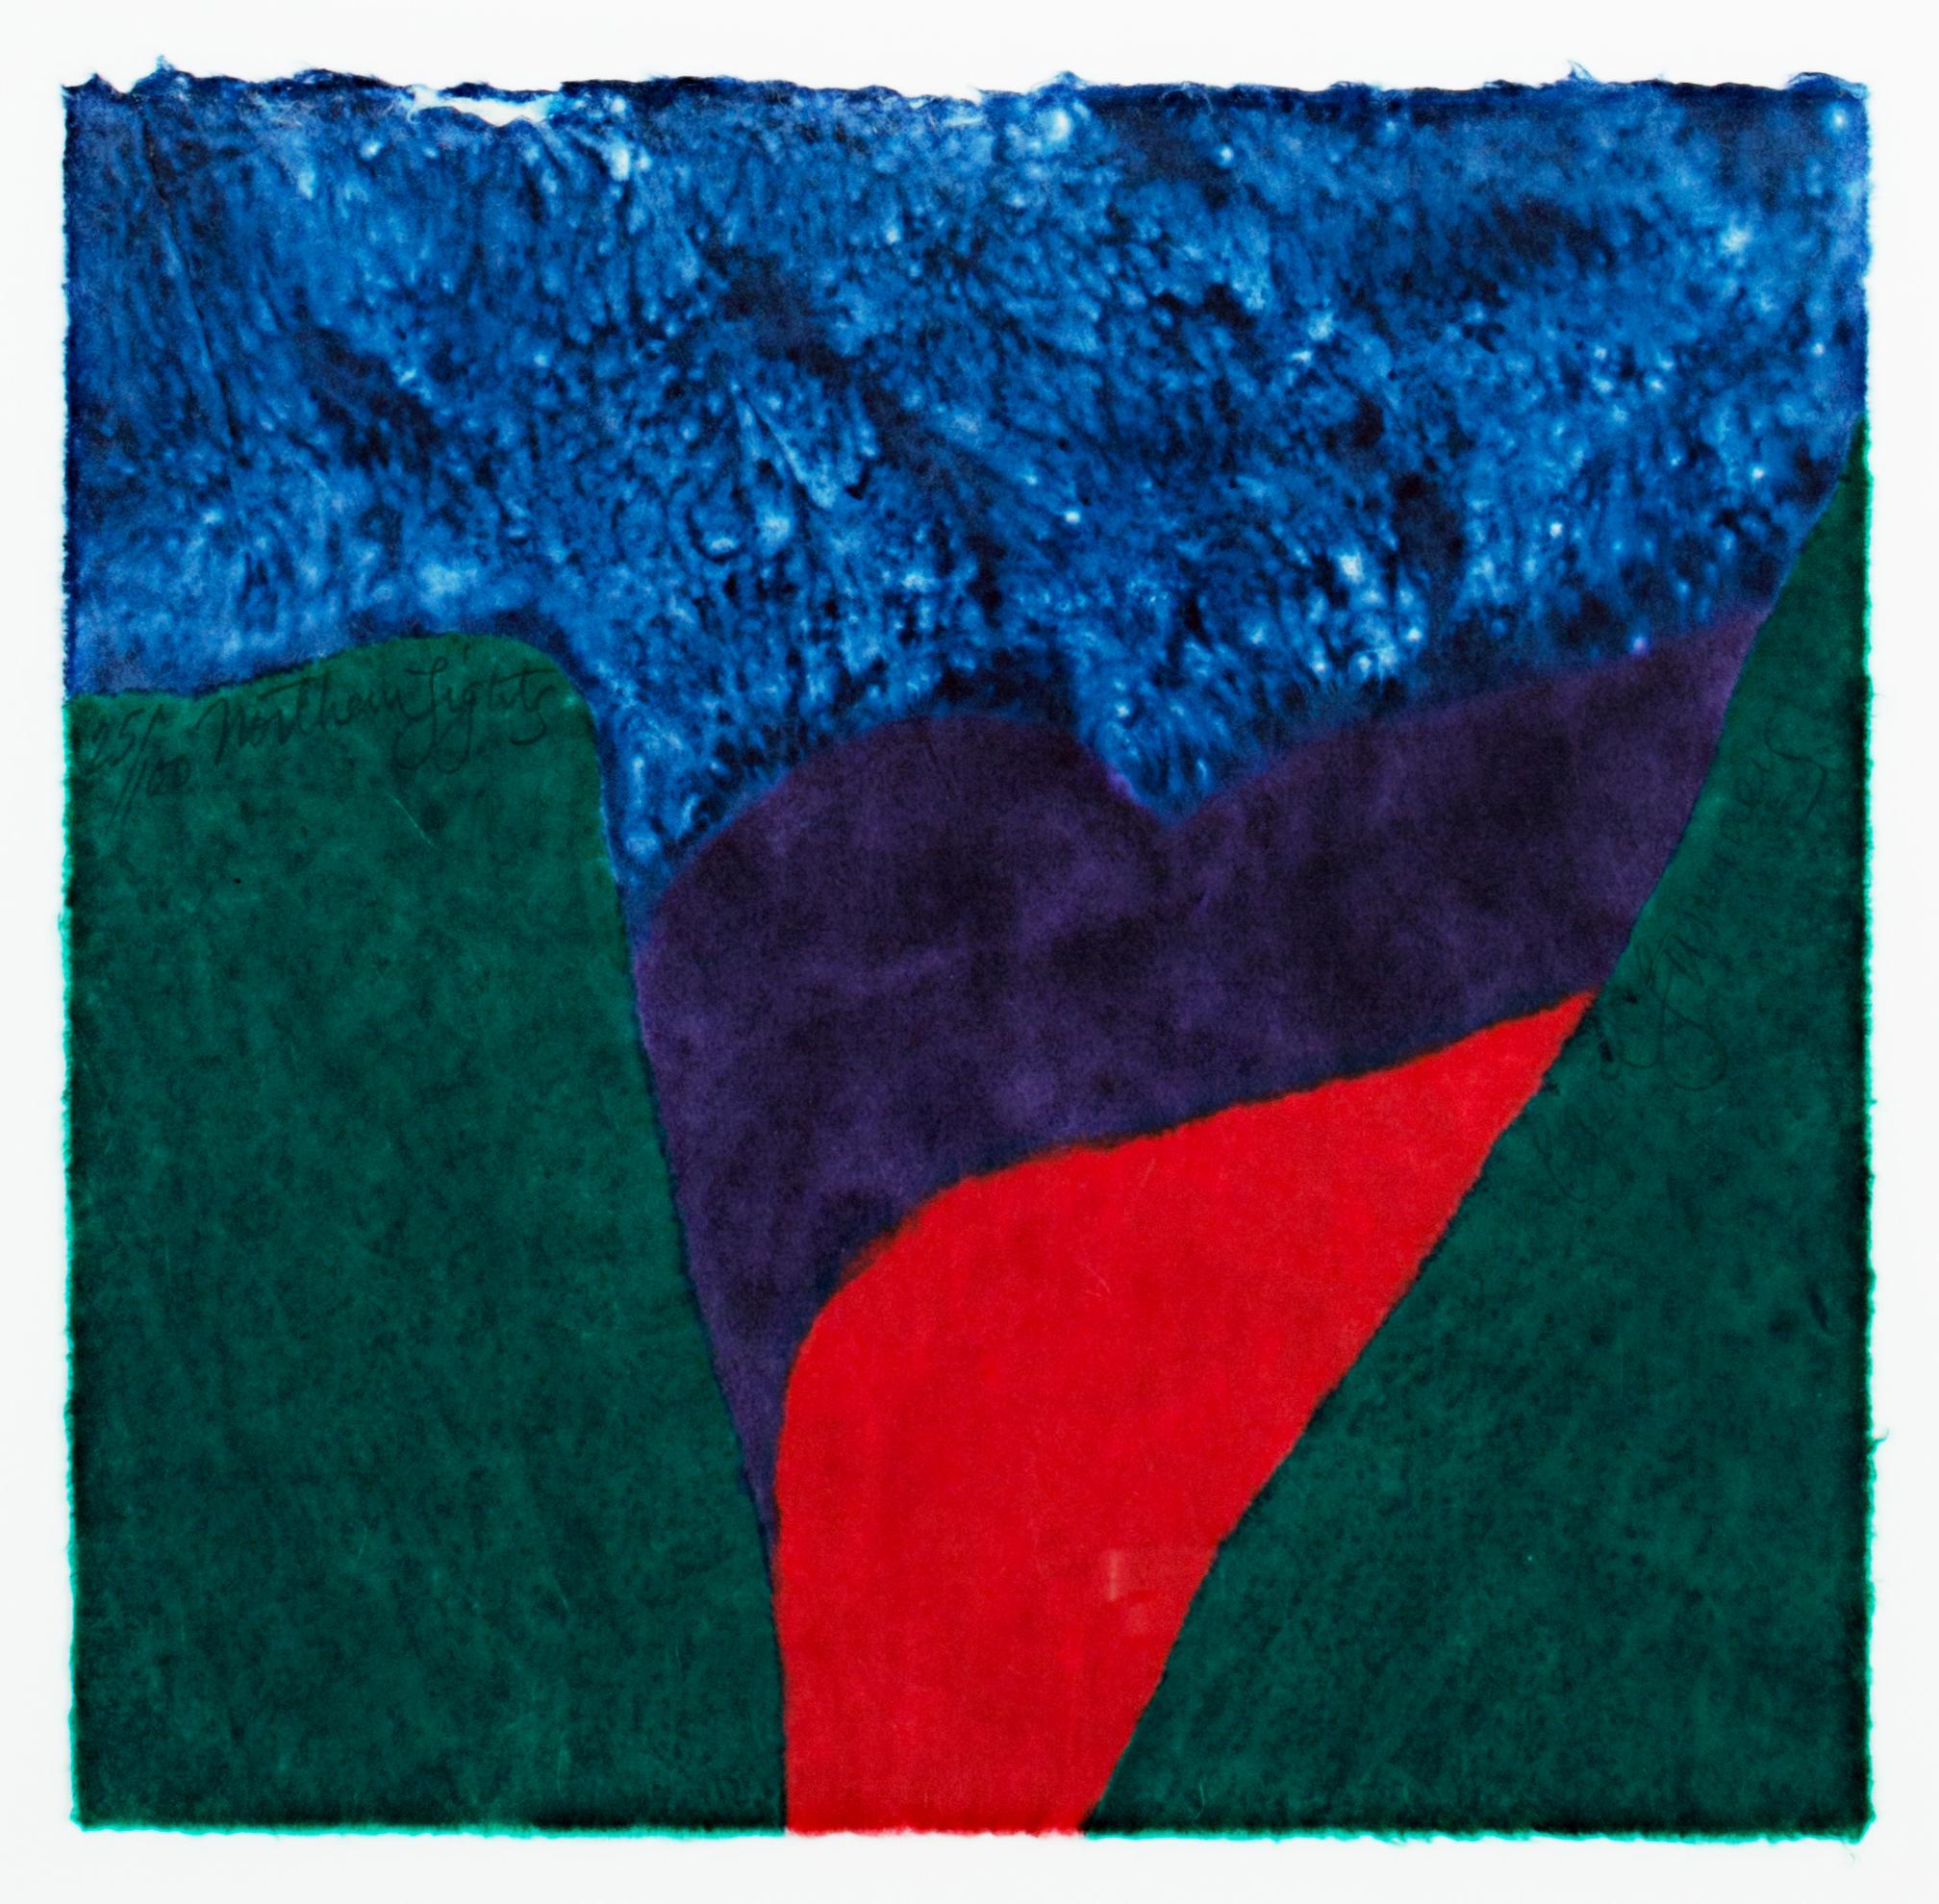 "Northern Lights" is a woodcut and monotype signed by Carol Summers. In the image, Summers offers a stylized landscape at nighttime. The vista is framed by green mountains to the left and right with purple peaks beyond the field of red. The texture